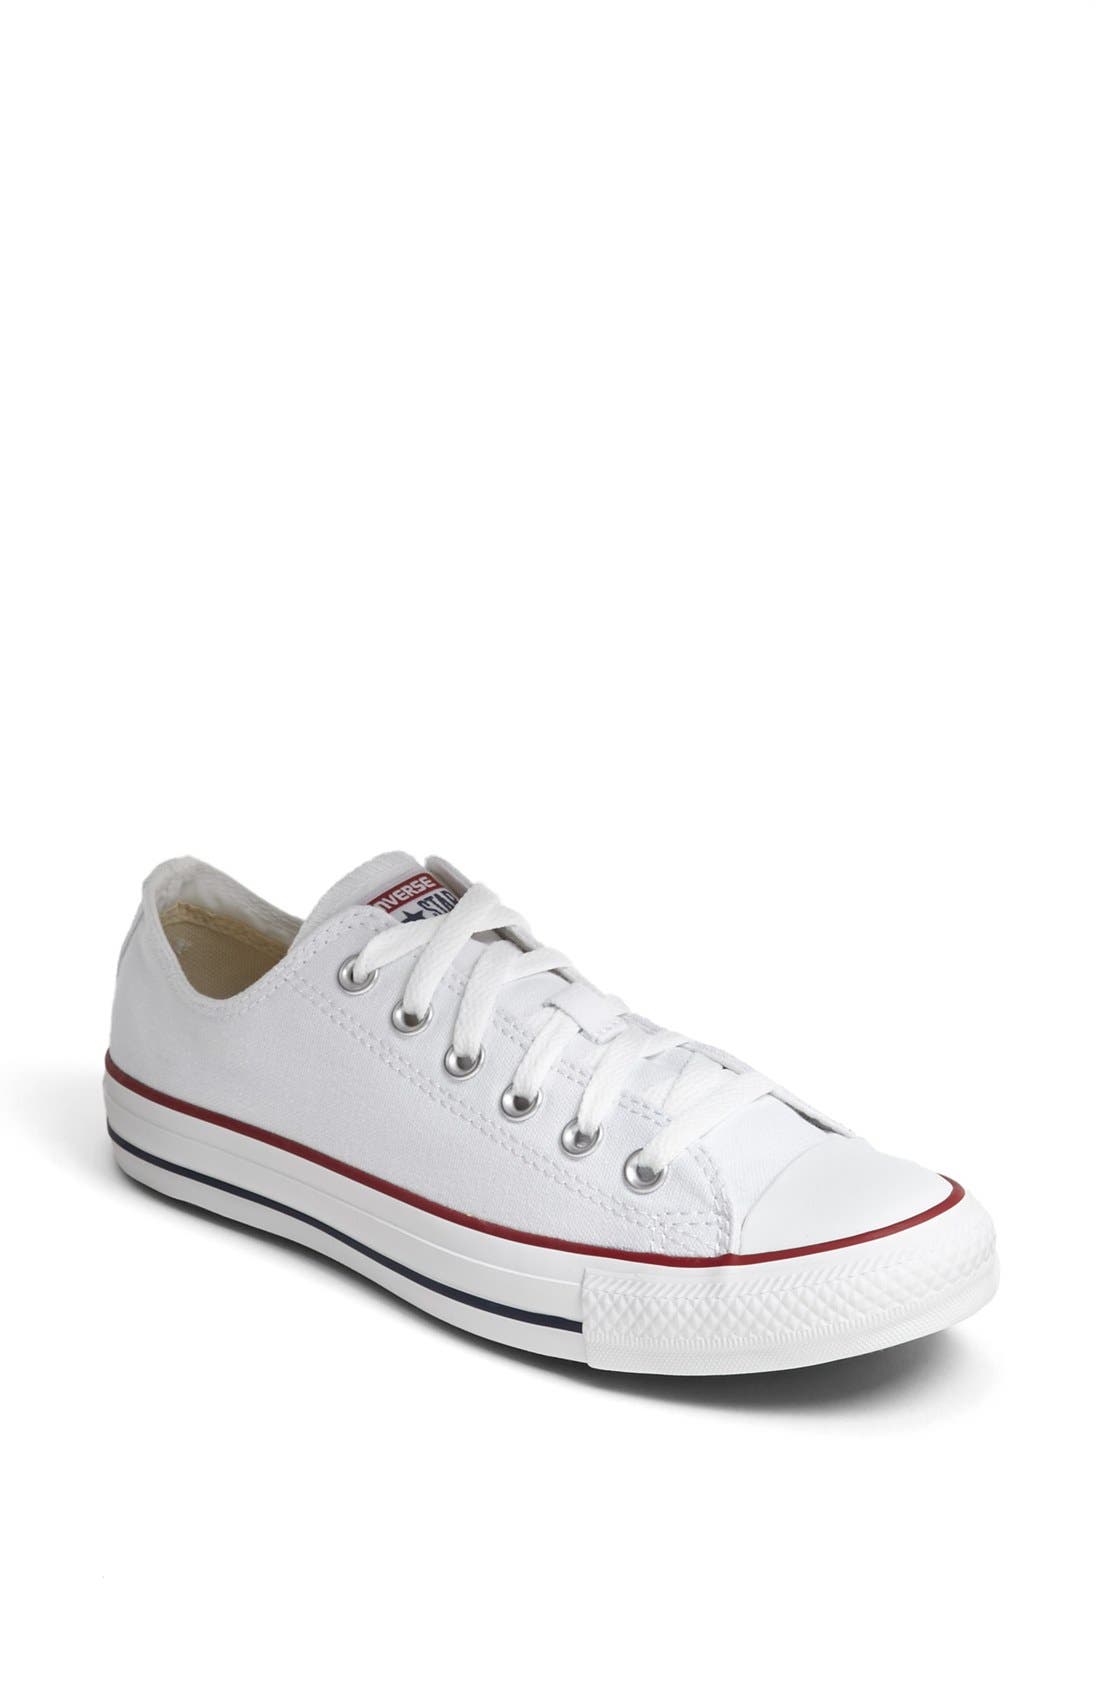 white low top converse womens